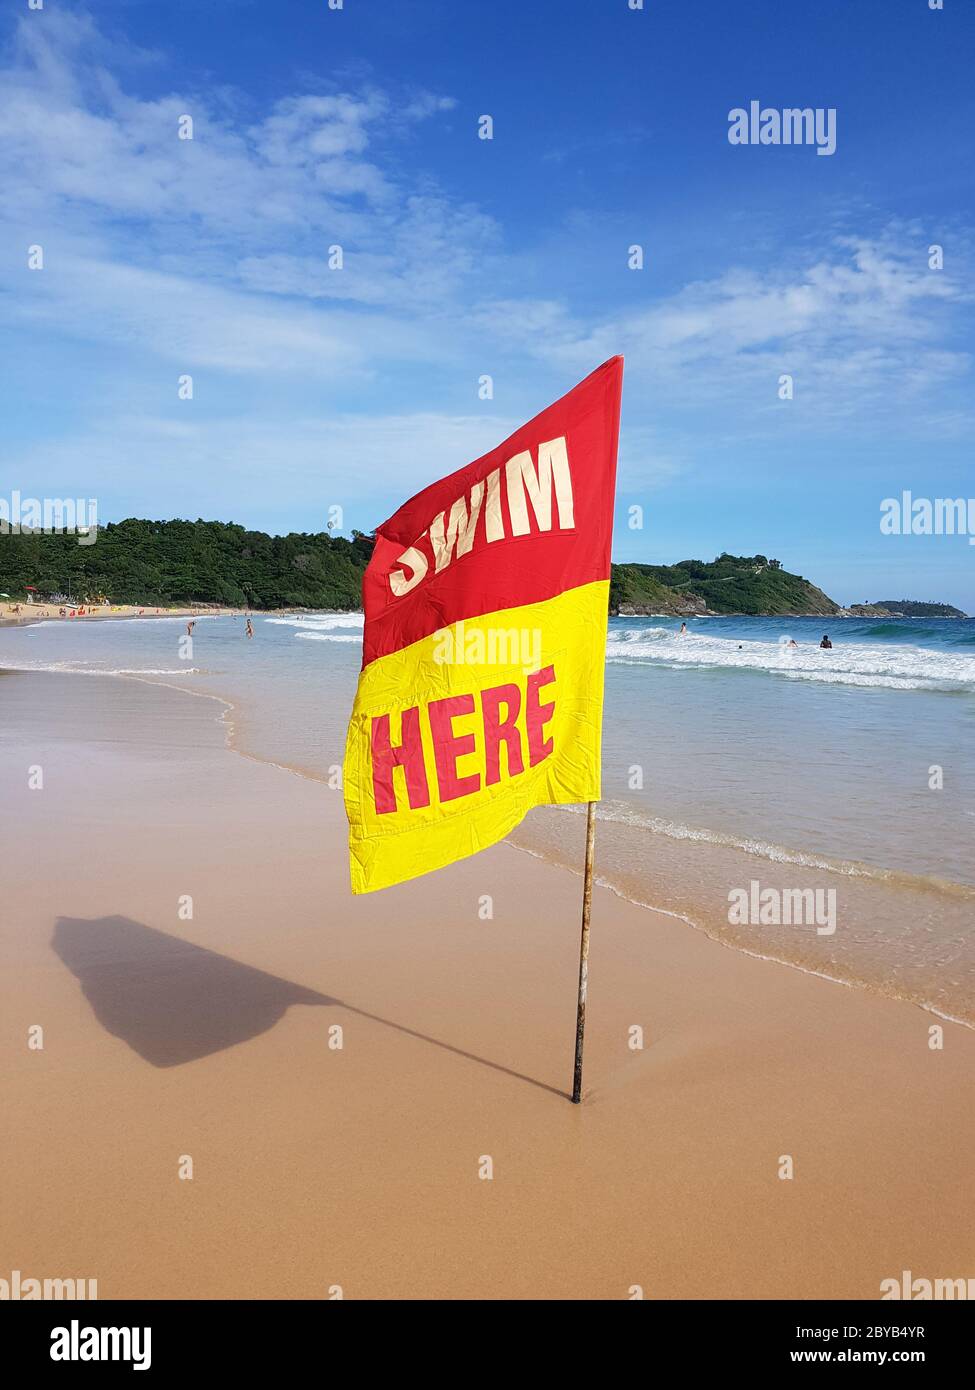 Swimming here sign flaf for security information on the beach Stock Photo